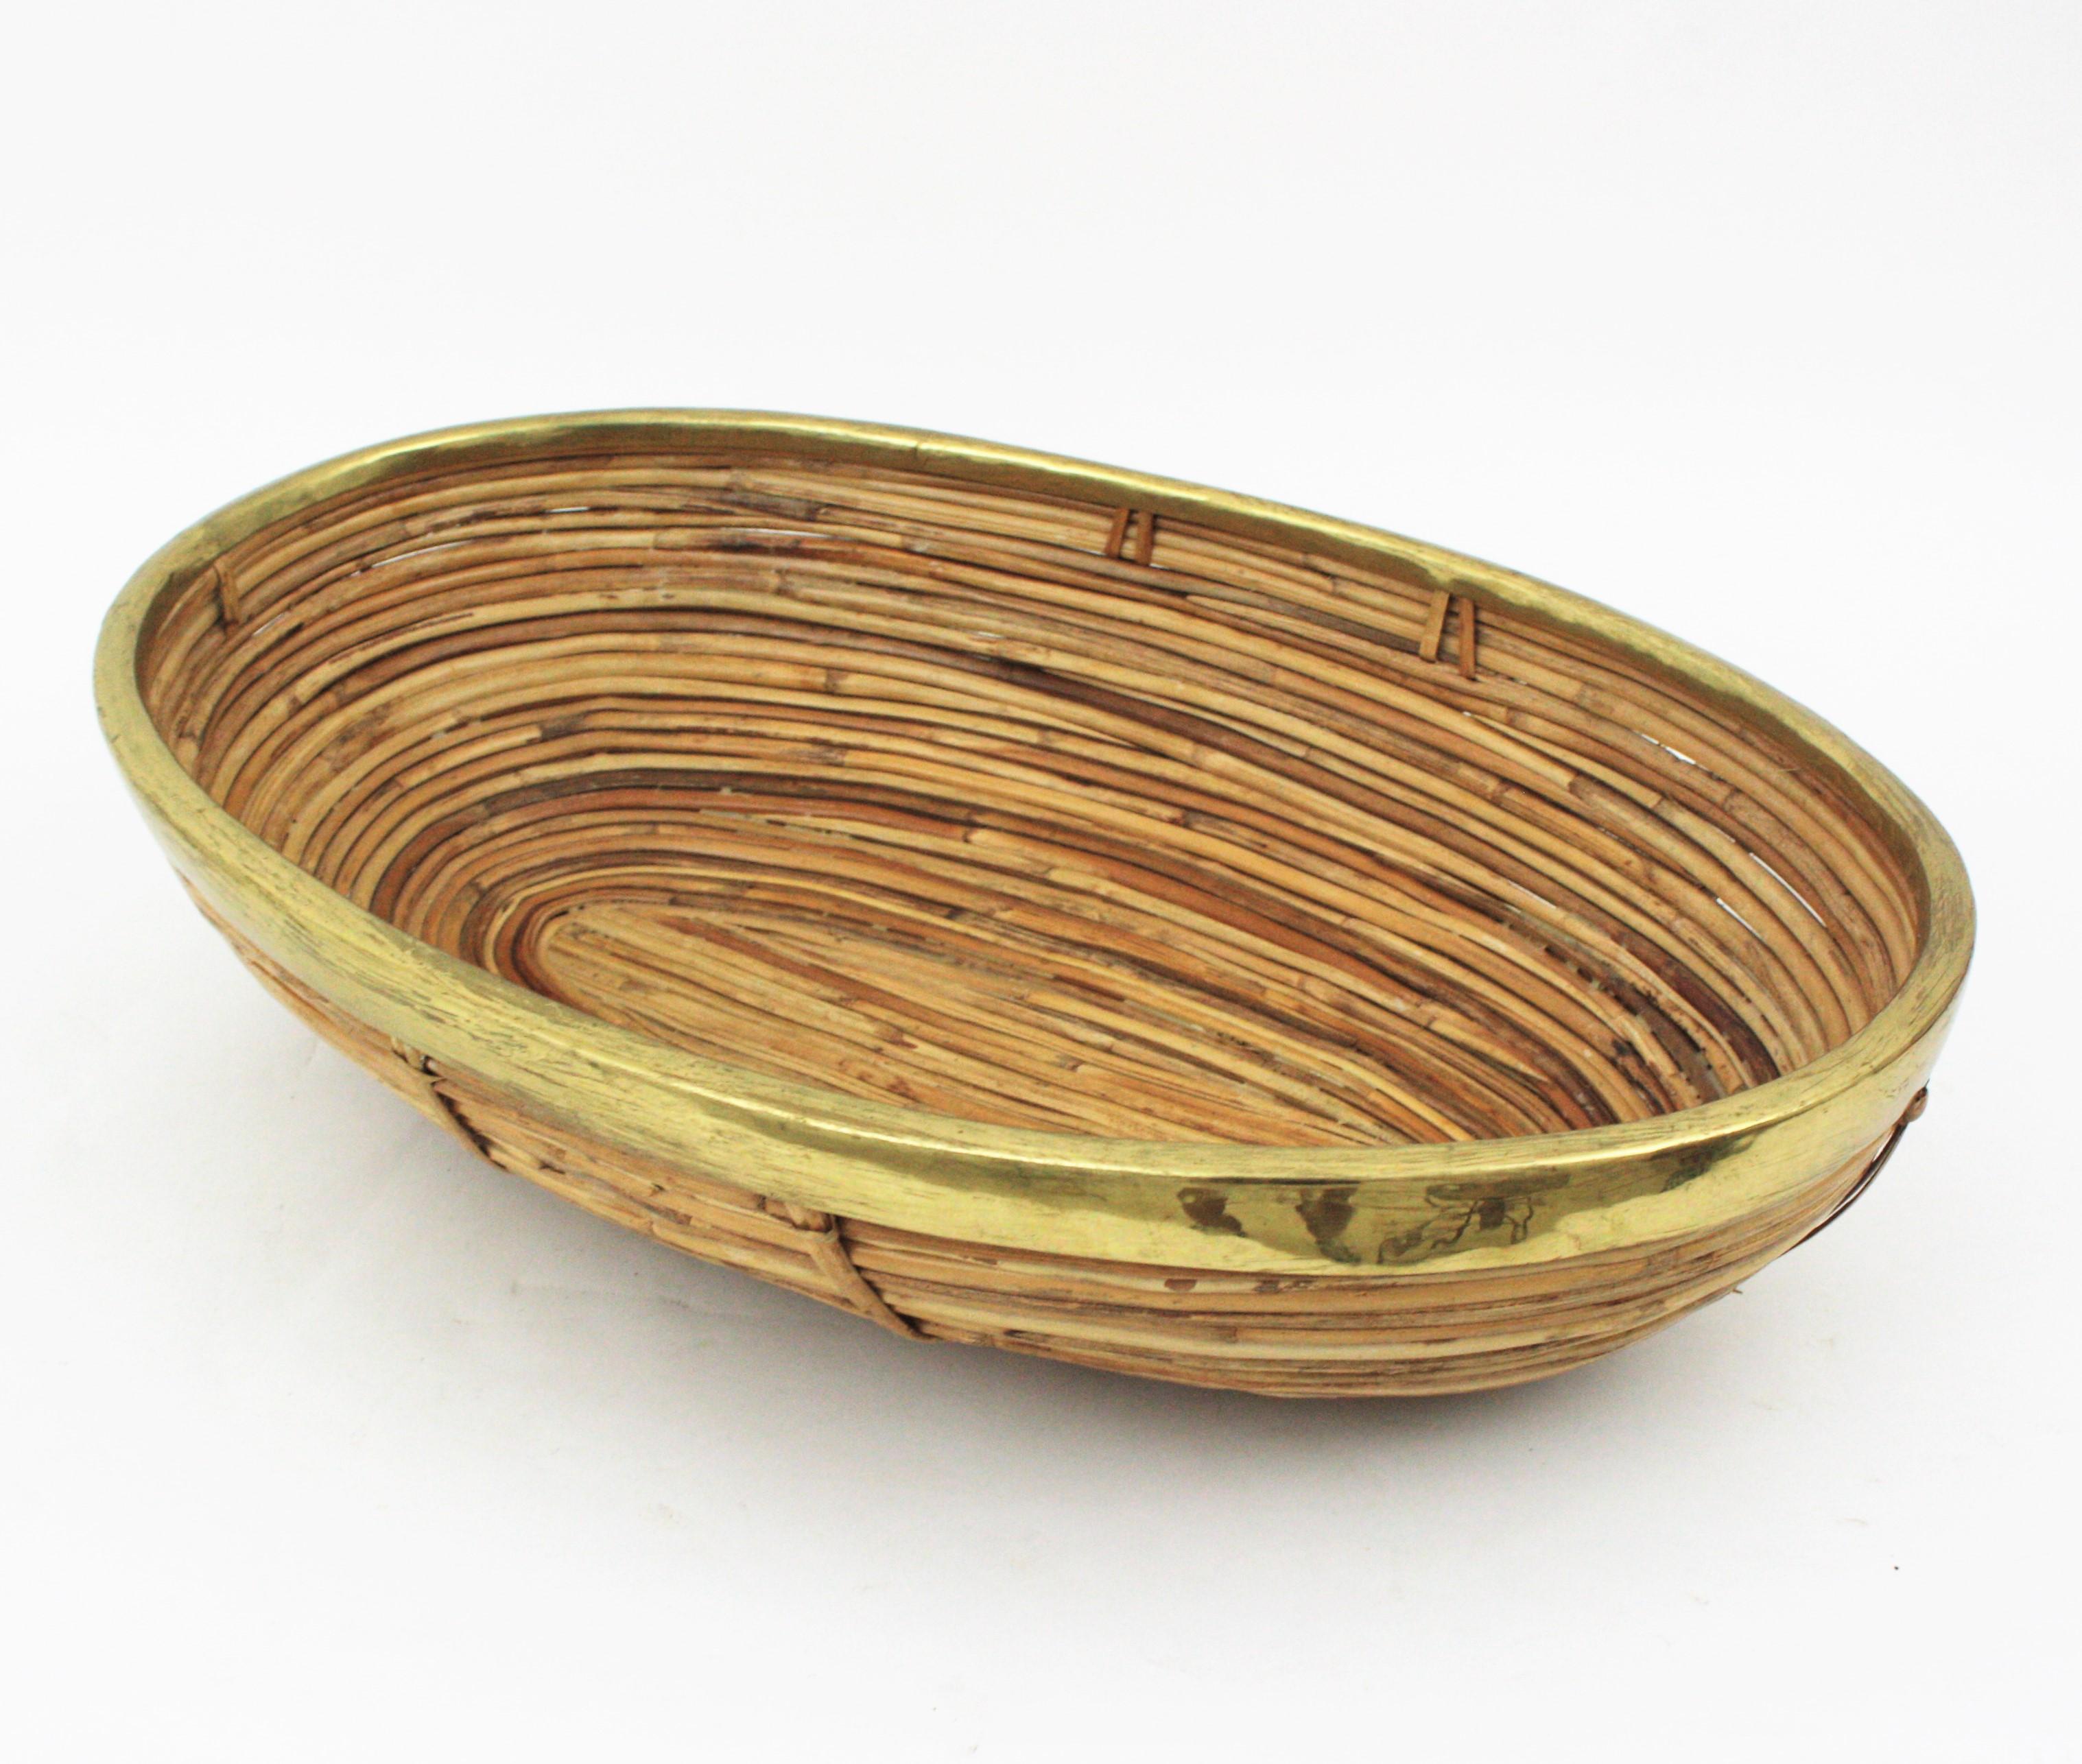 Rattan and Brass Italian Large Oval Basket Centerpiece Bowl, 1970s For Sale 6